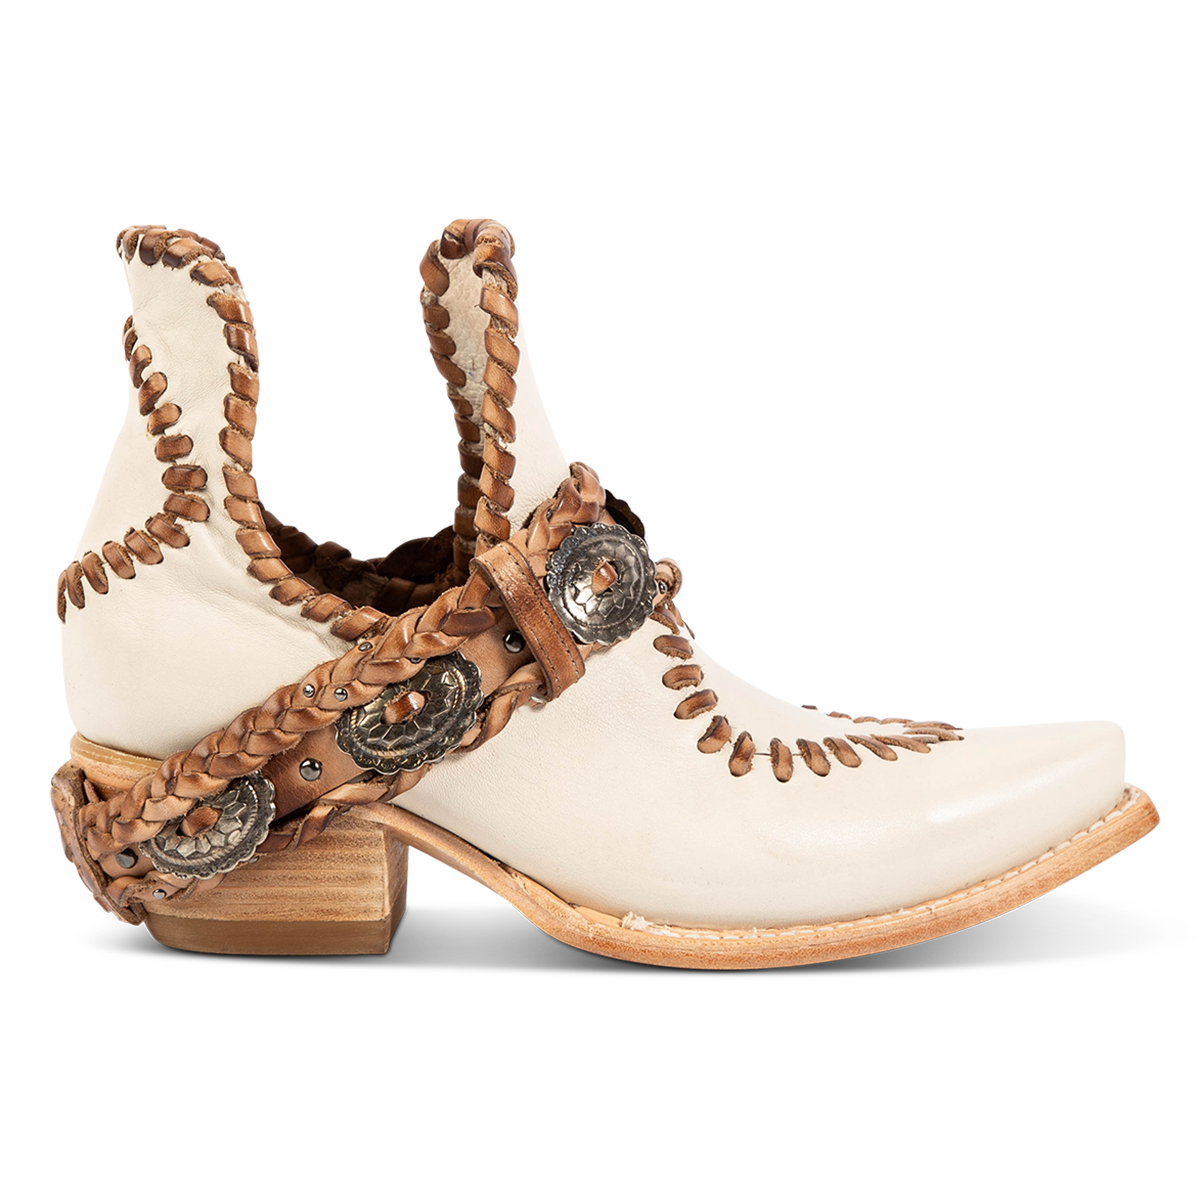 FREEBIRD women's Whimsical off white leather bootie with whip stitch detailing, leather braided belt and snip toe construction